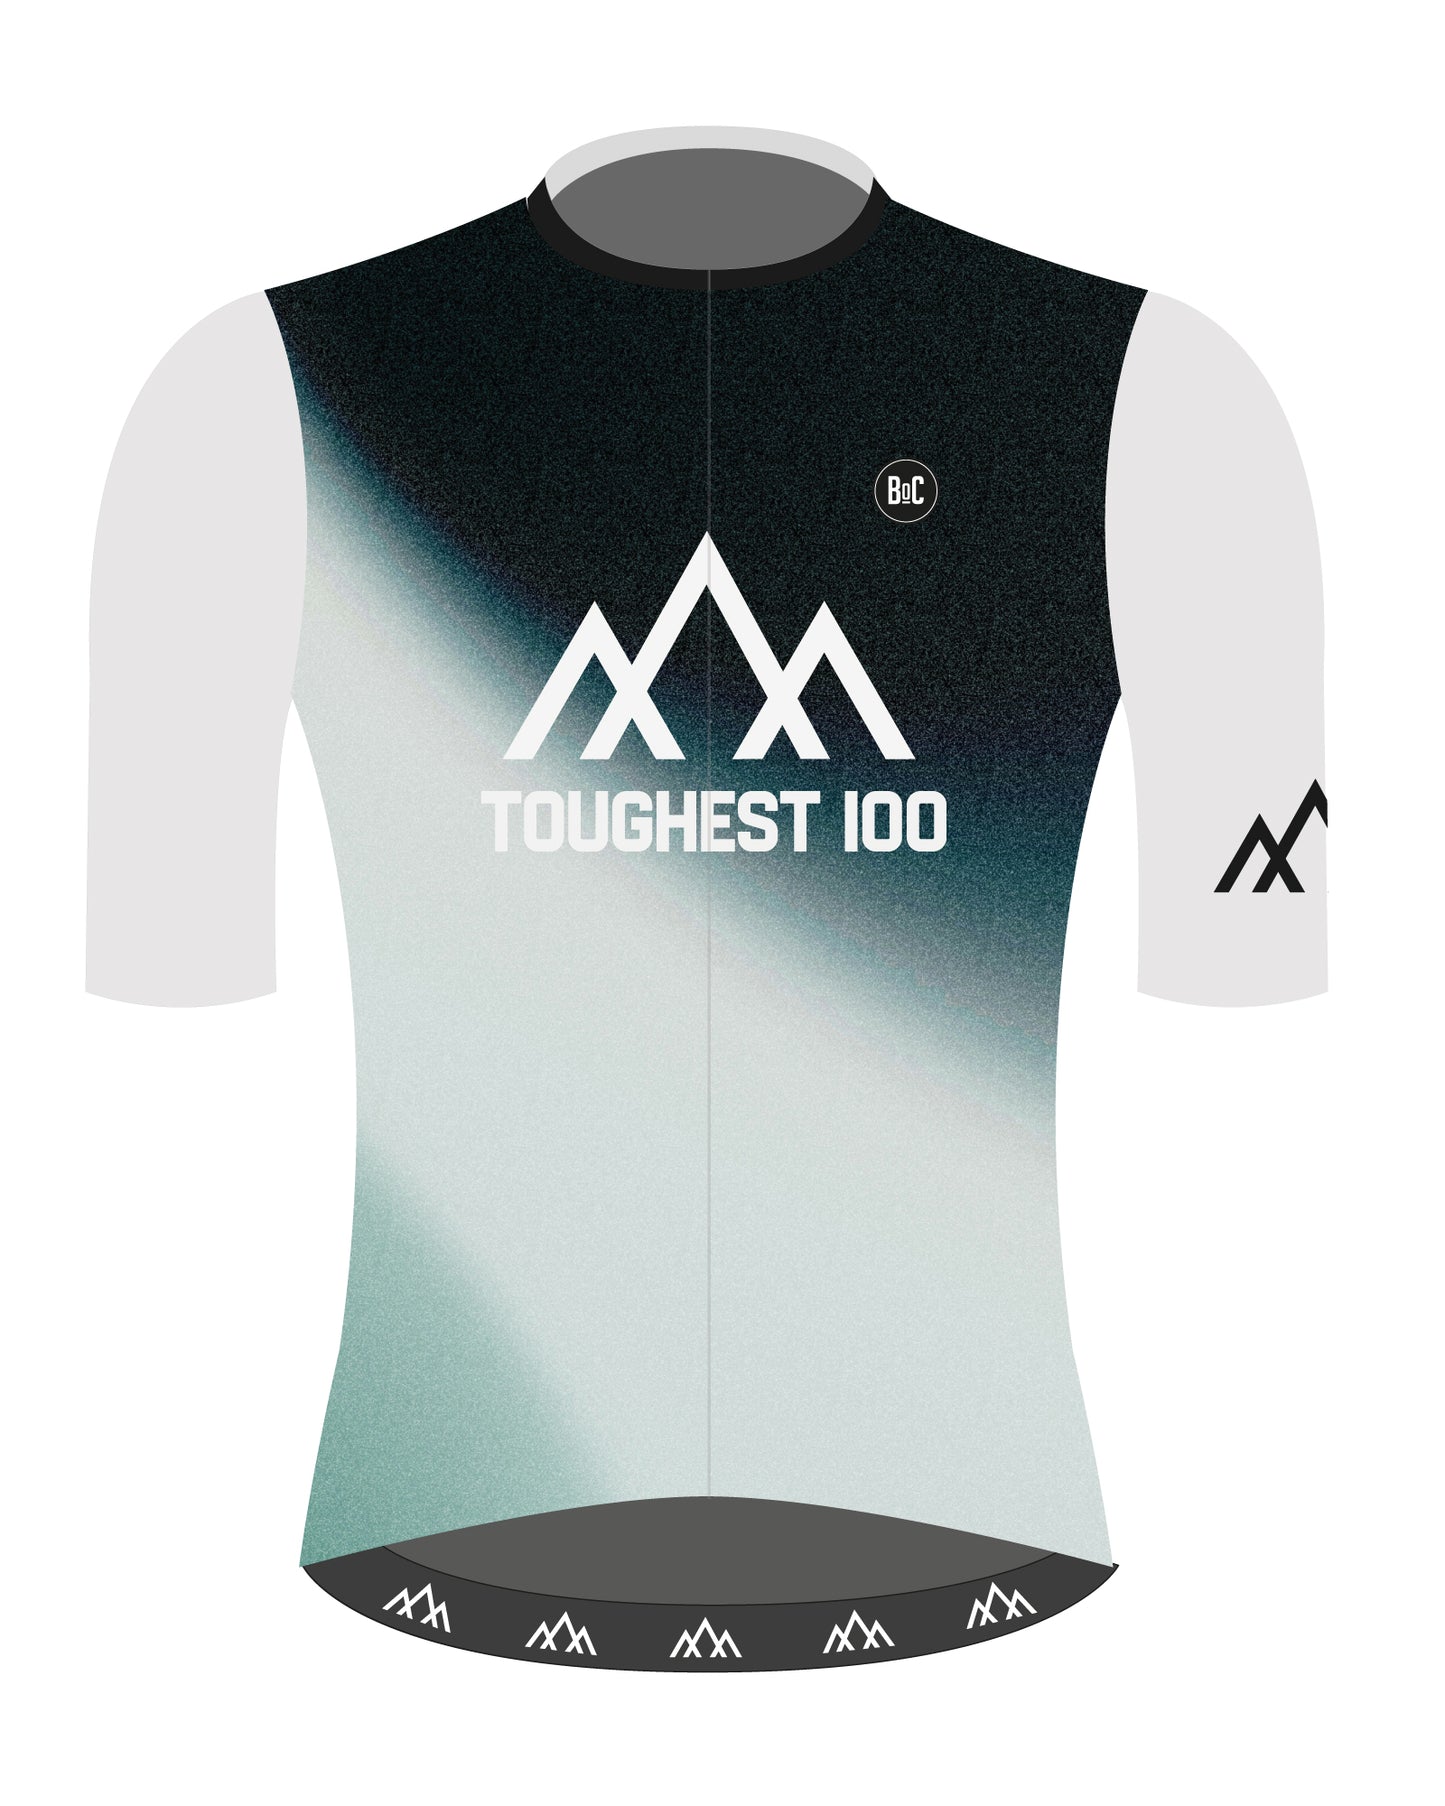 The Toughest 100 Jersey